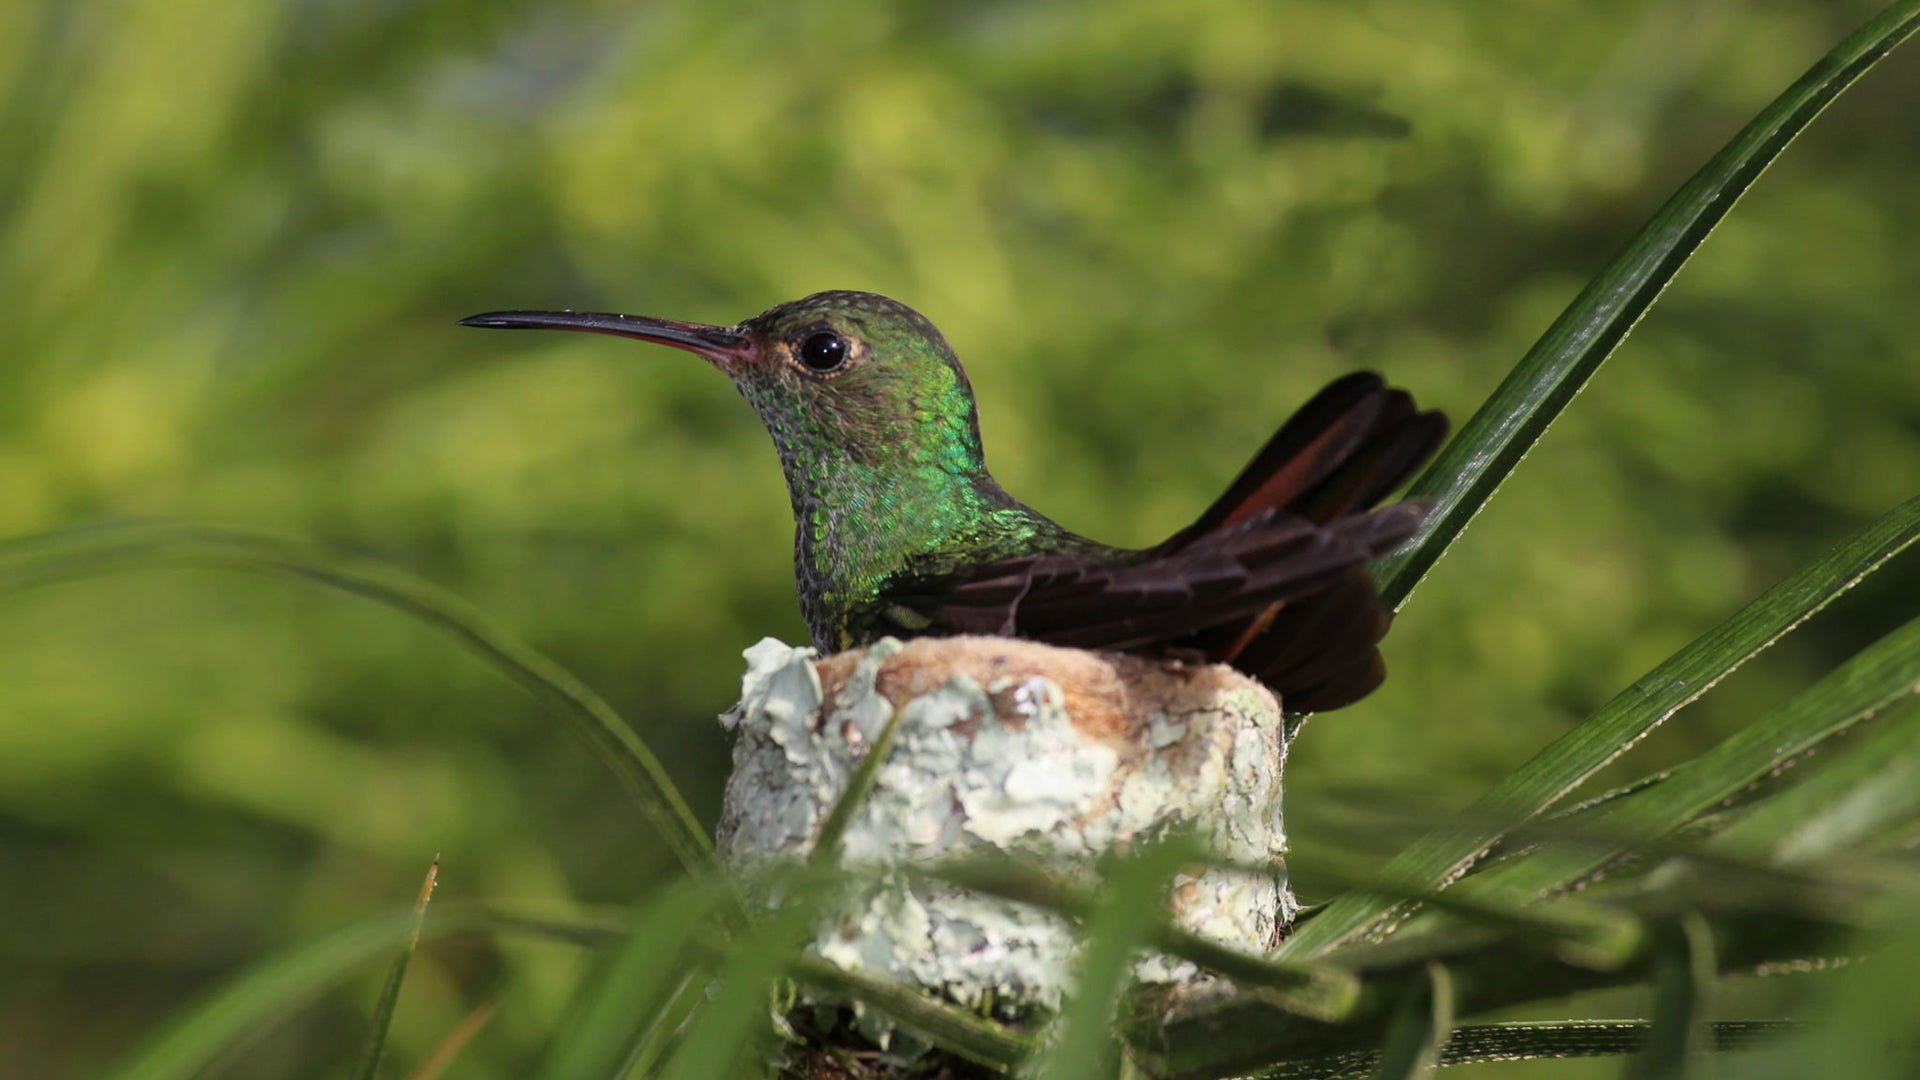 The Marvel of Hummingbird Hatching: From Egg to Flight